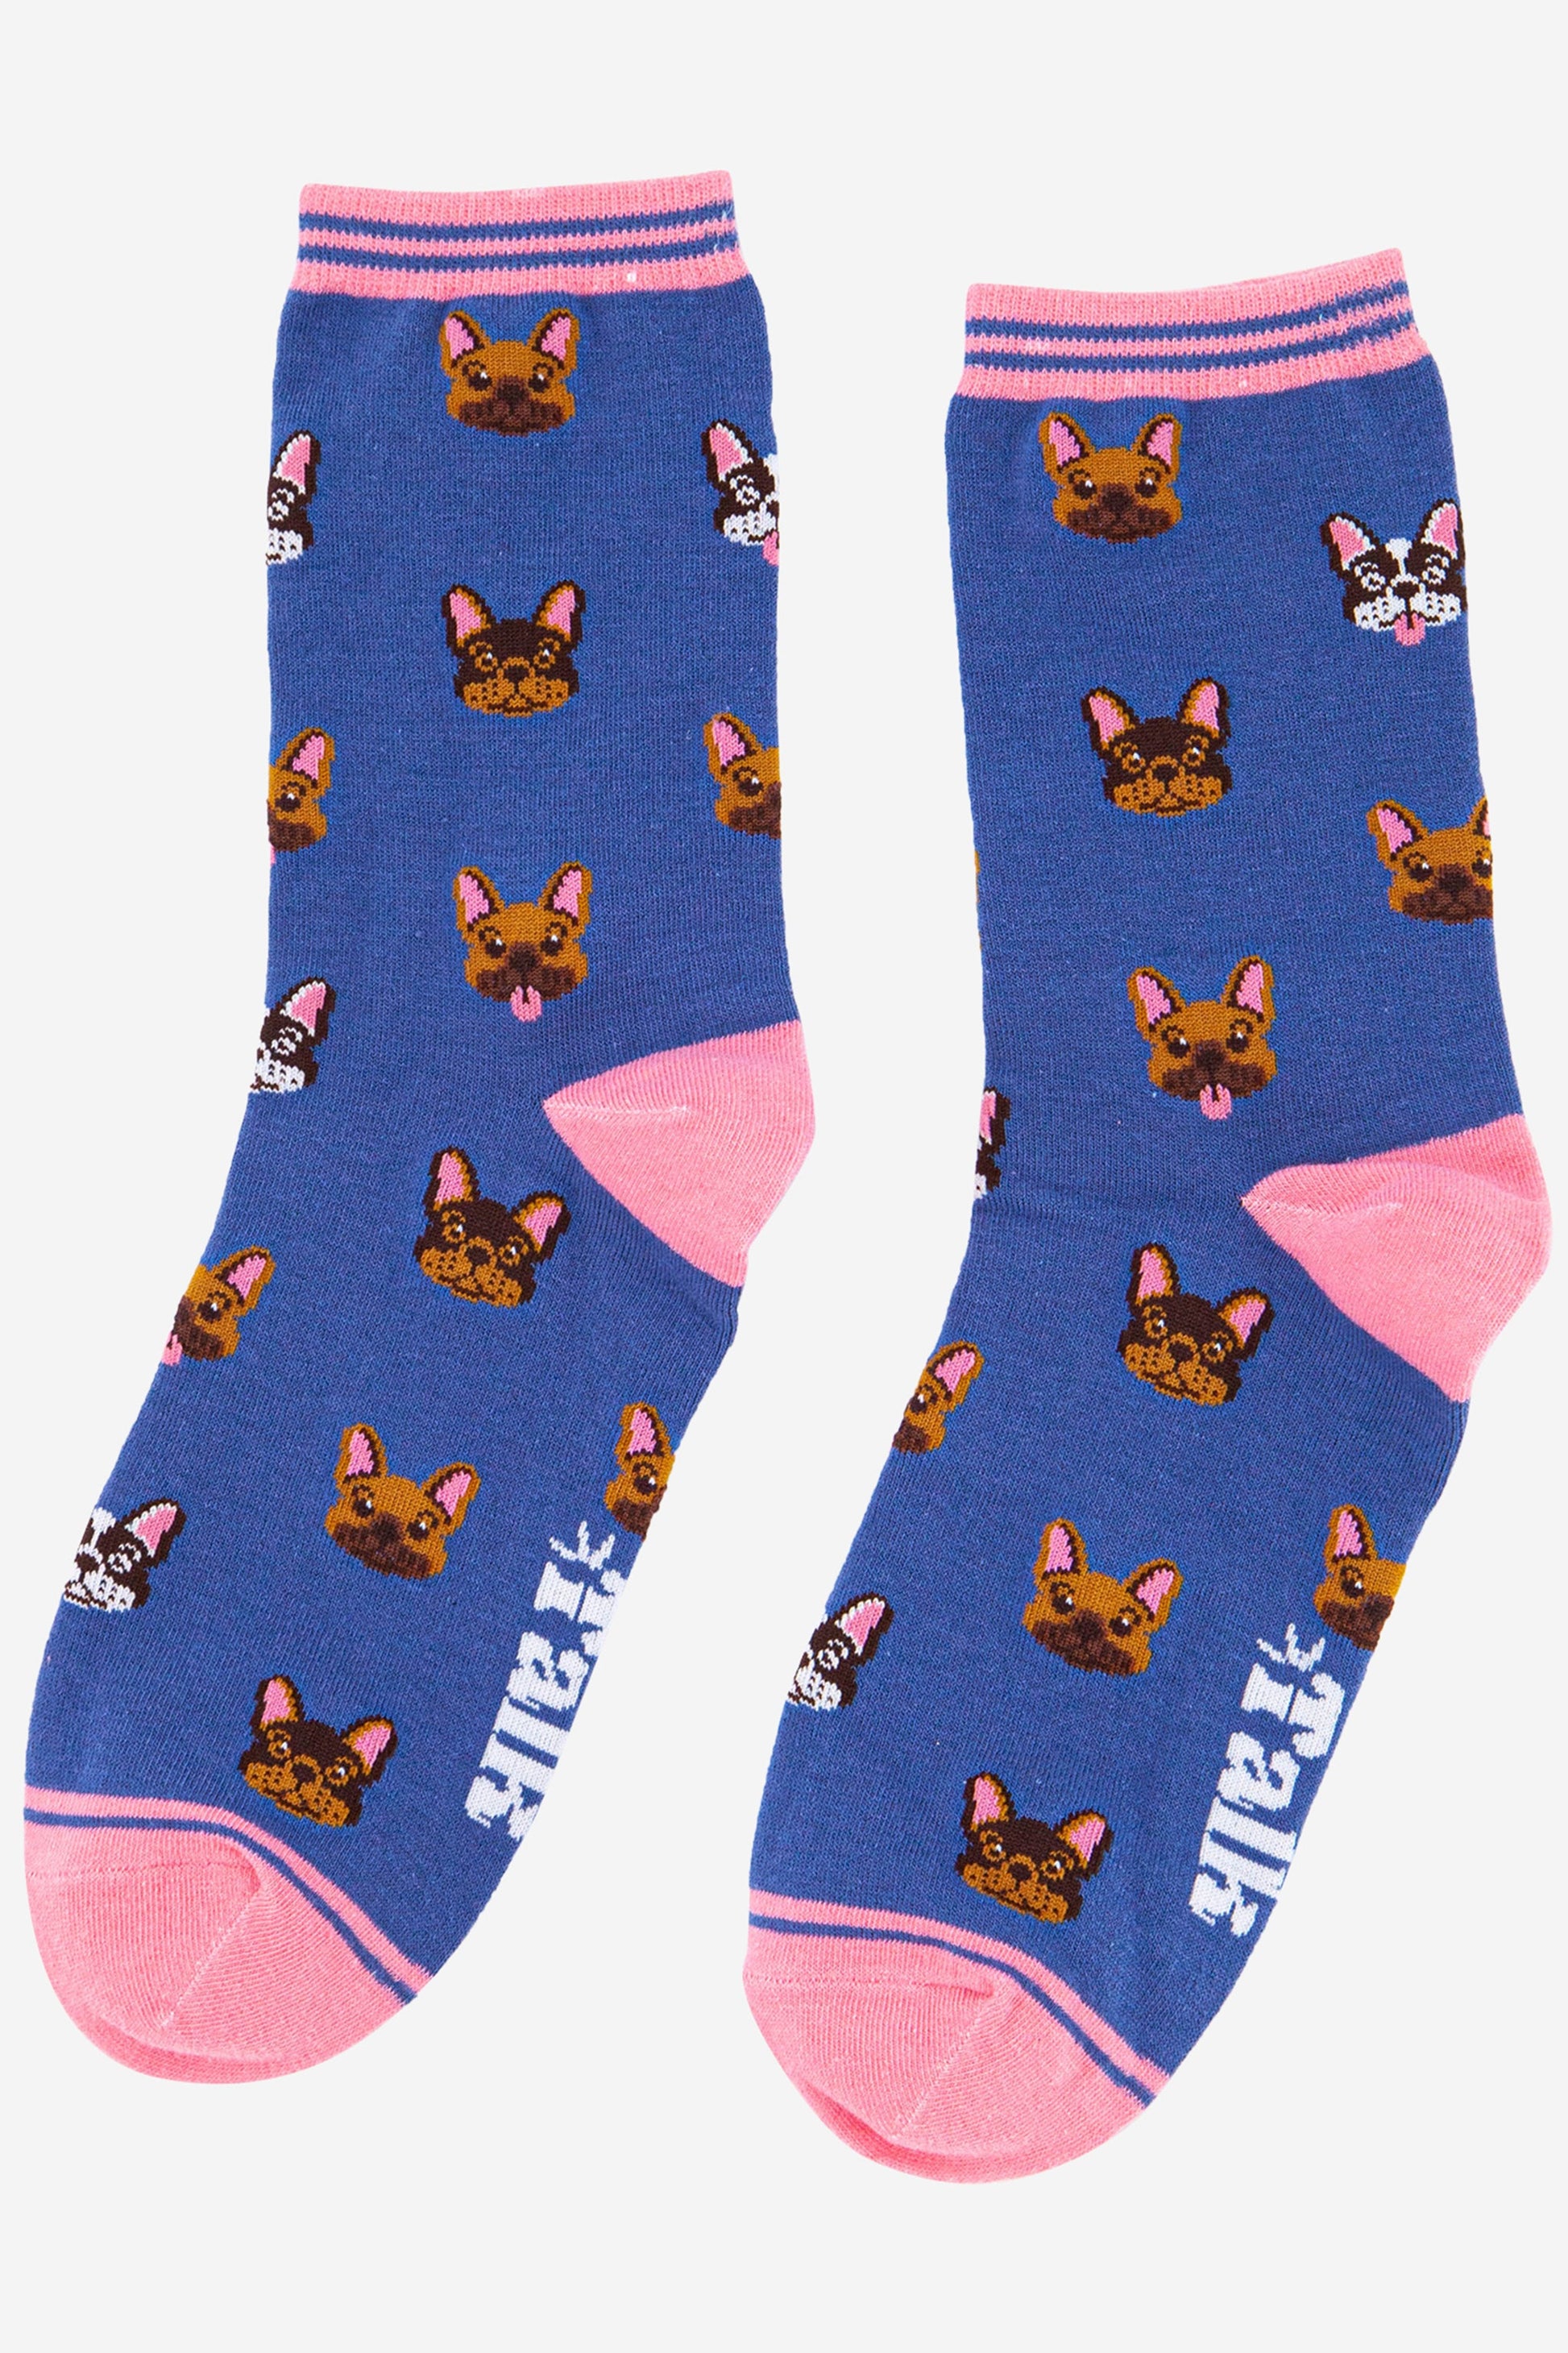 blue and pink bamboo socks with an all over french bulldog pattern and a pink and blue striped cuff